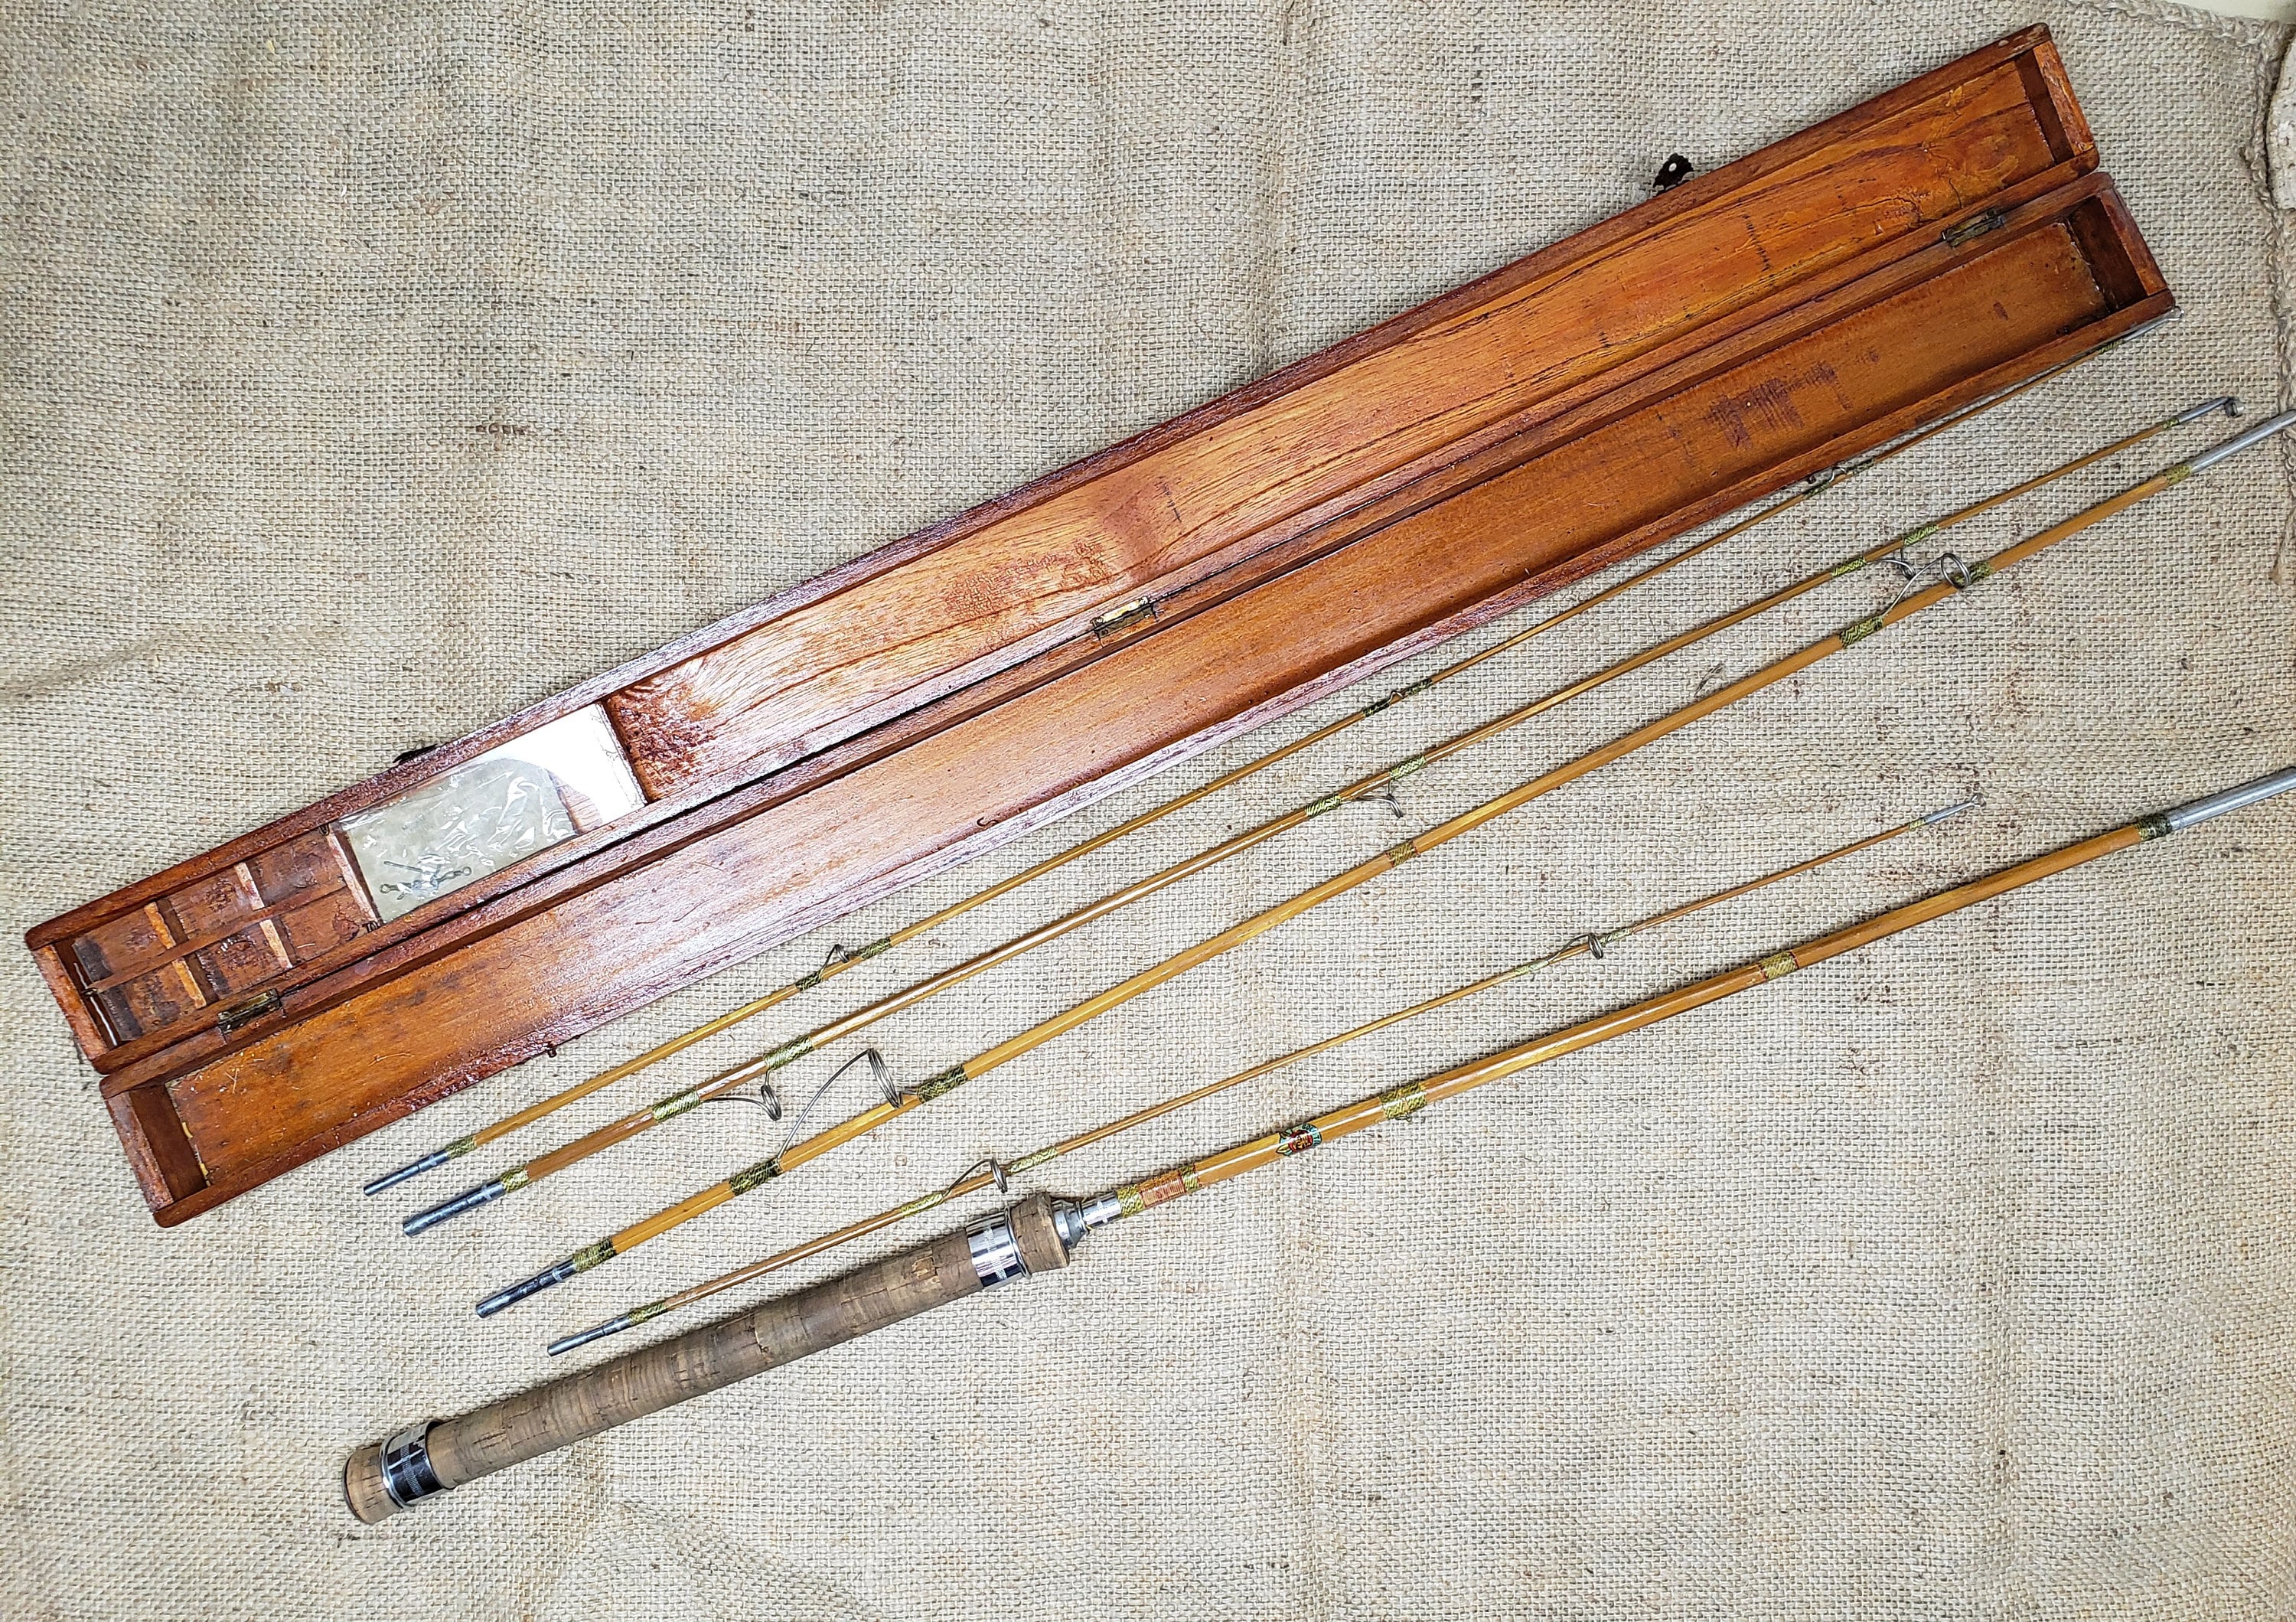 Vintage Fly Fishing Rod Kit, Bamboo Fly Fishing Boxed Kit, Very Good  Condition, 1940's Original Fly Rod Kit and Wooden Case Looks Unused -   India